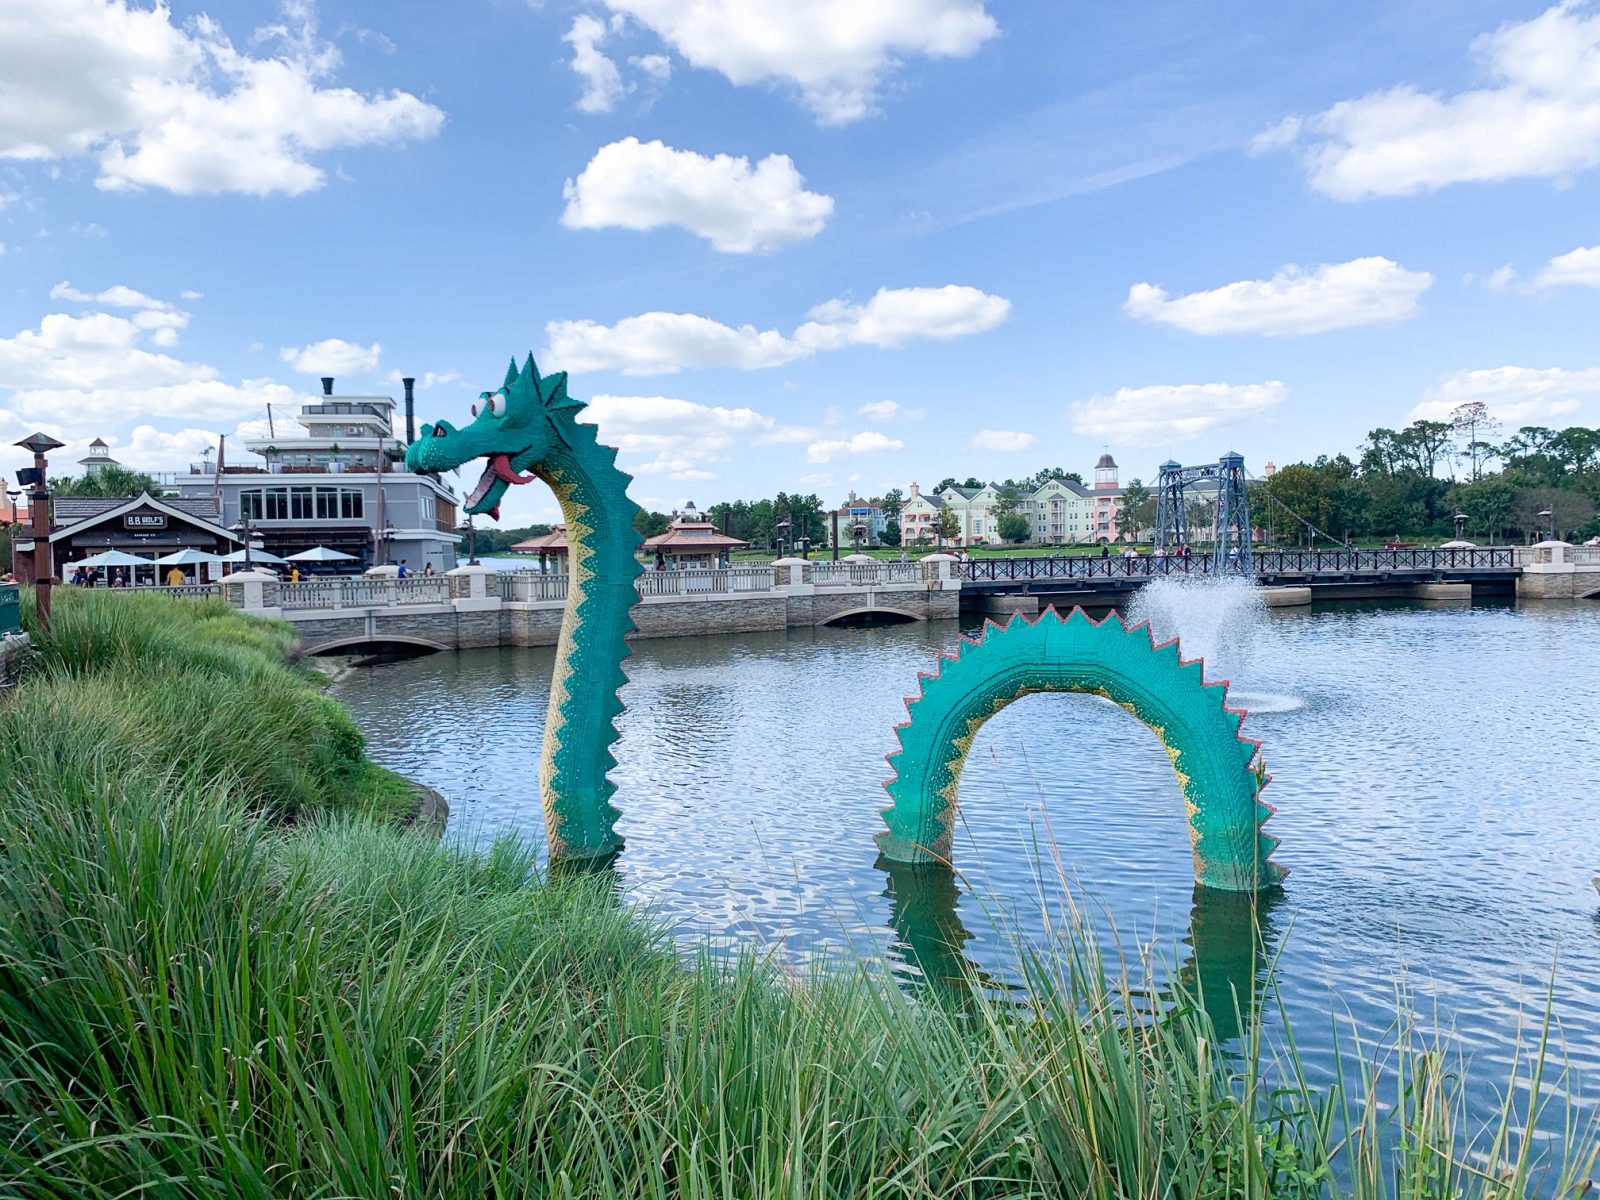 lego dragon located in the water